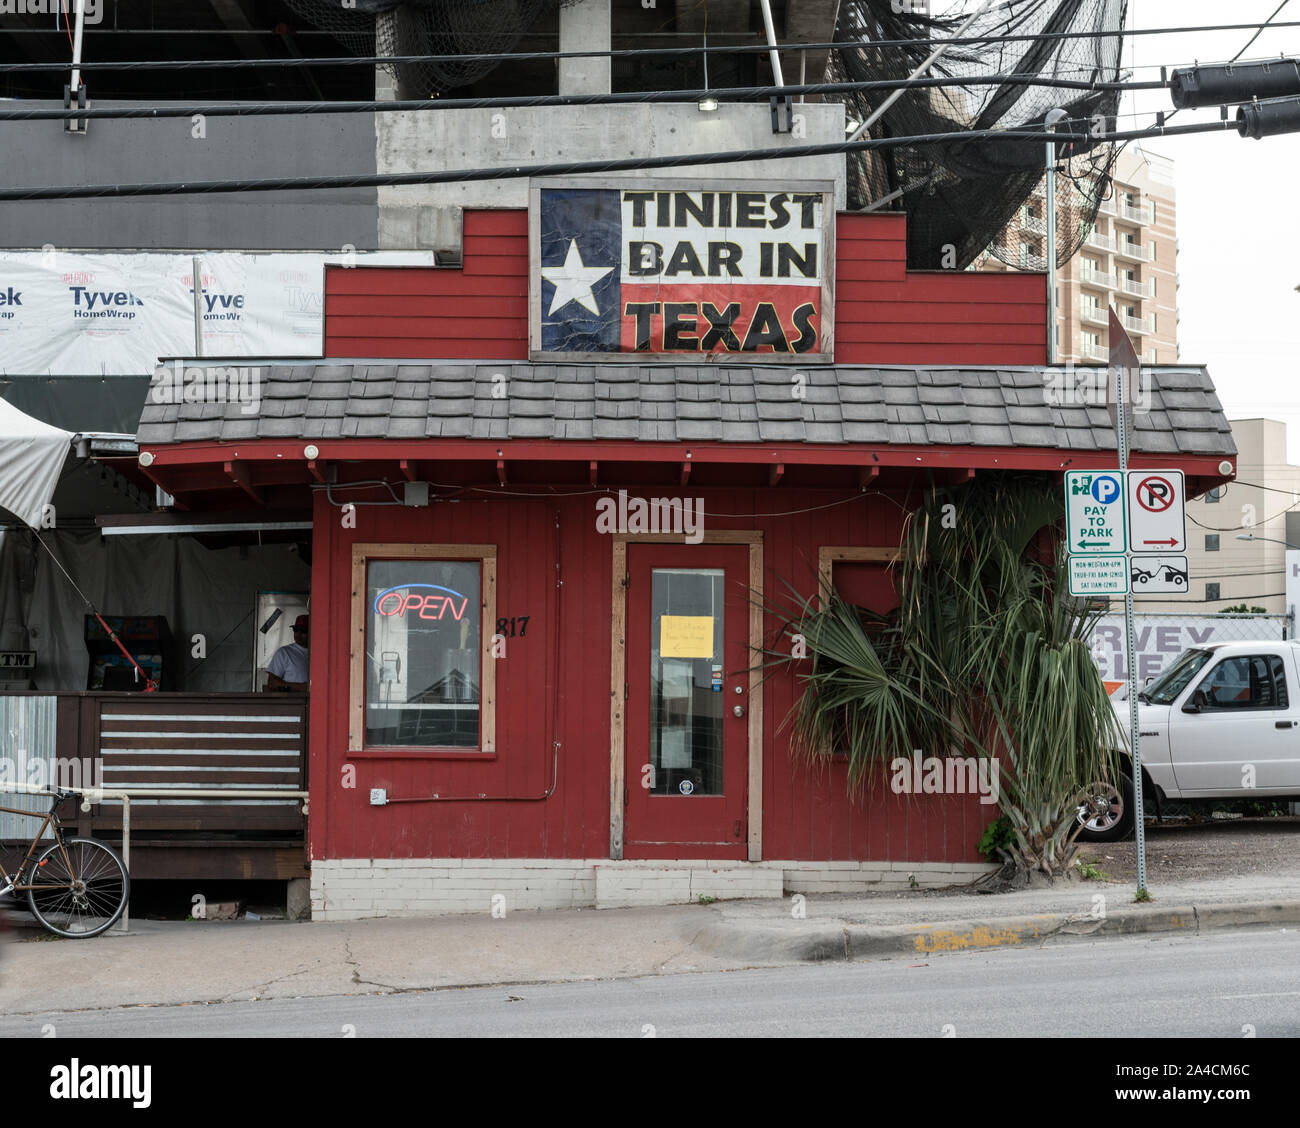 The establishment in Austin, Texas, that promotes itself as the tiniest bar in Texas, an assertion that could not be independently confirmed Stock Photo